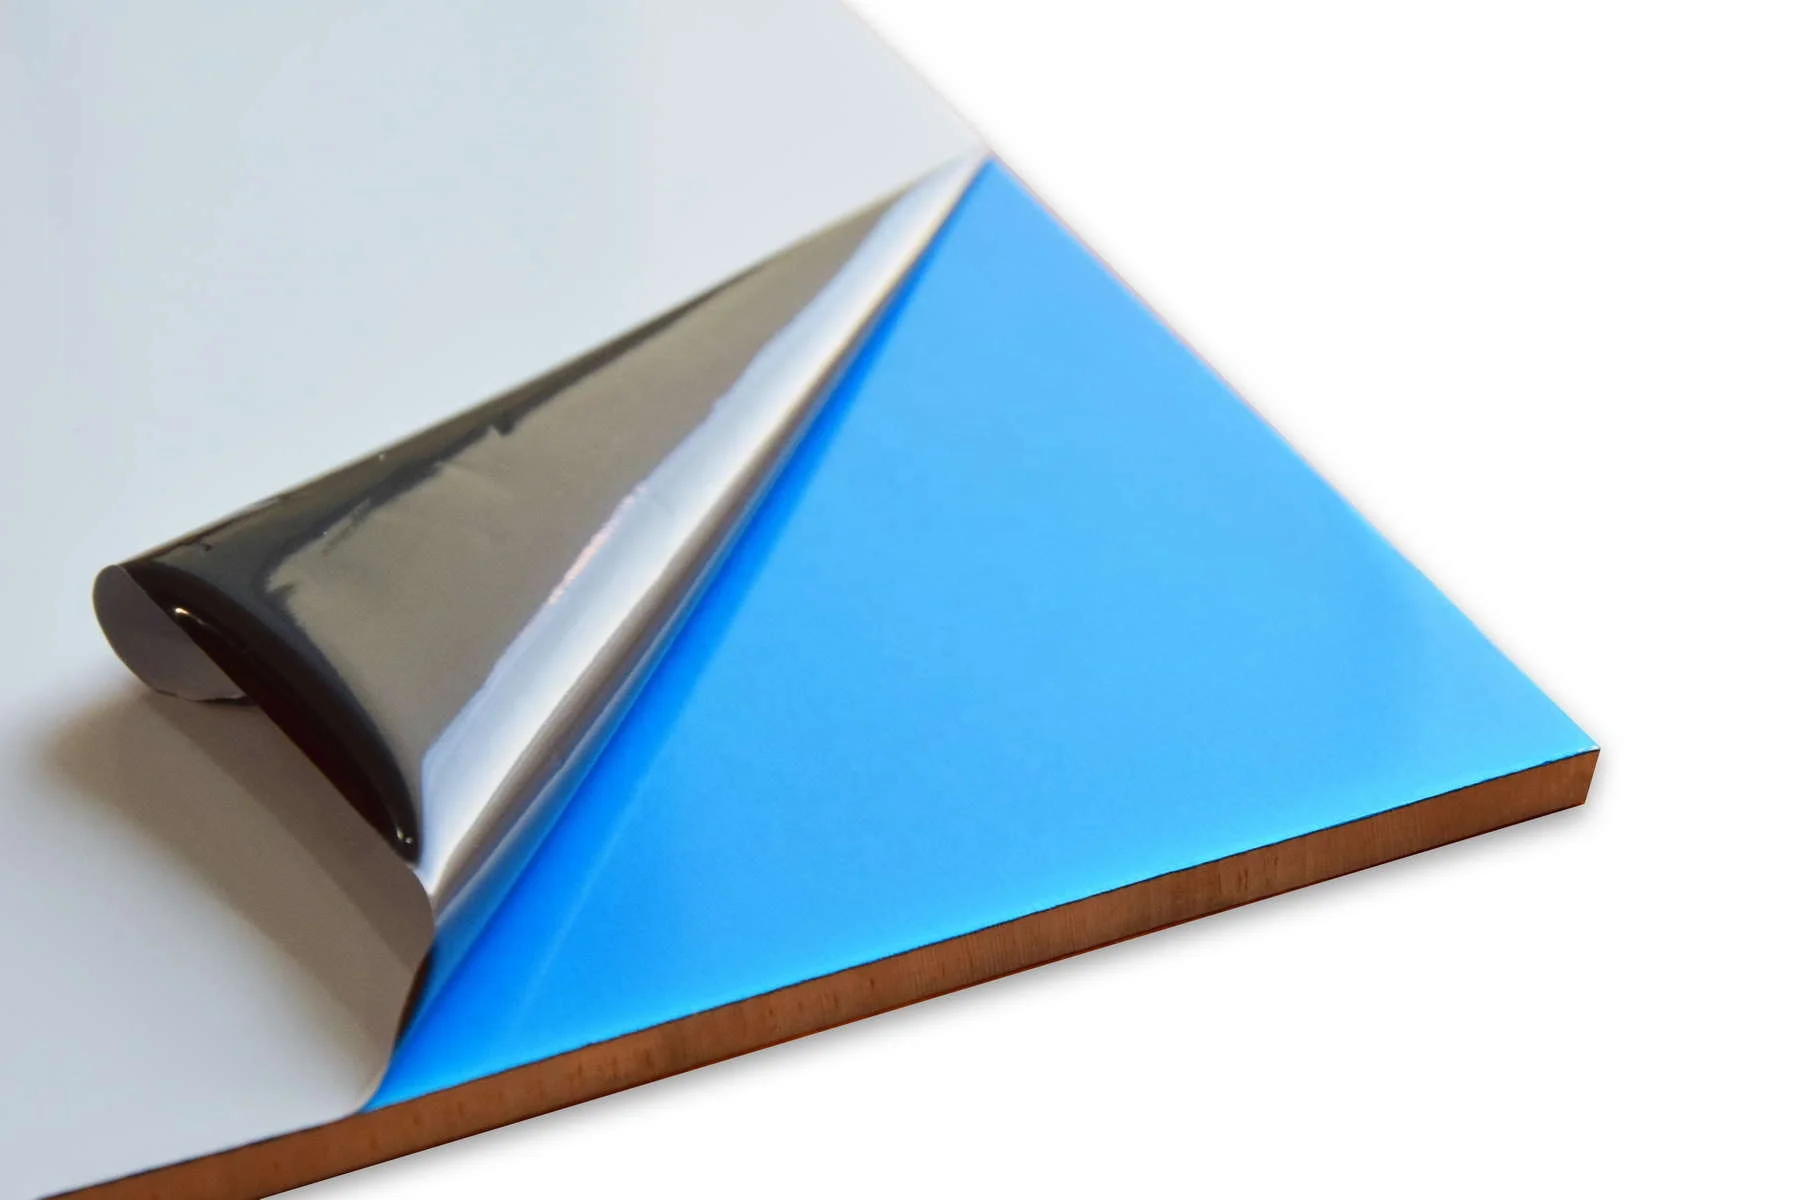 Hydro blue top coating photoengraving magnesium plate for hot foil stamping and embossing blocks